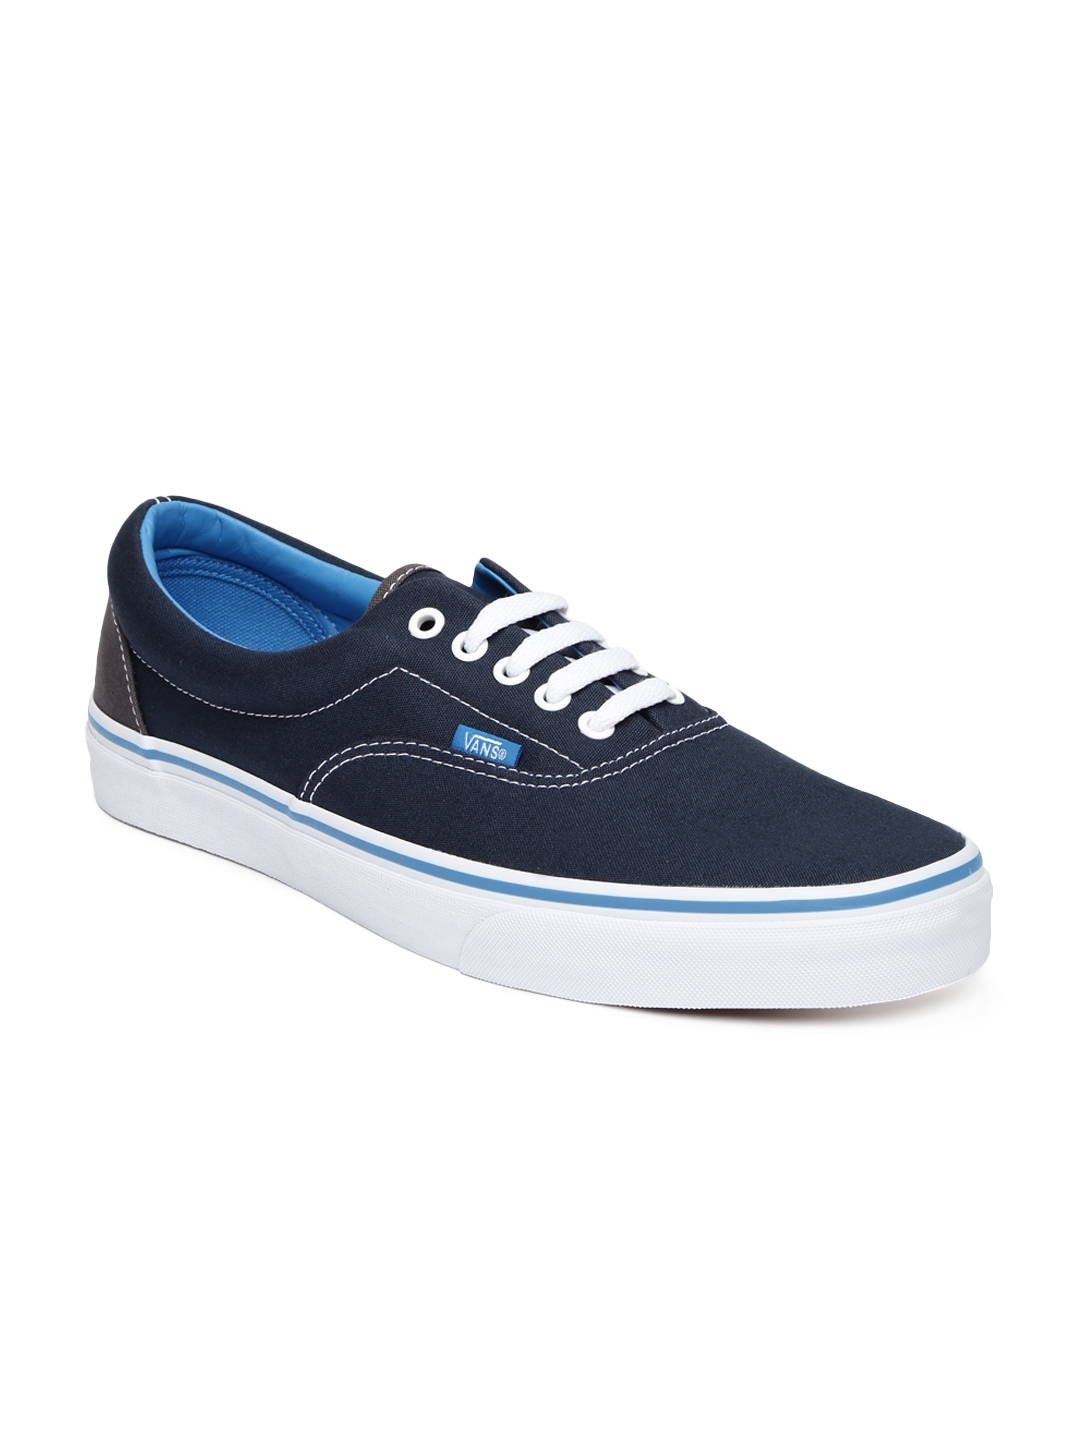 Buy Vans Unisex Navy Era Casual Shoes - Casual Shoes for Unisex 1207755